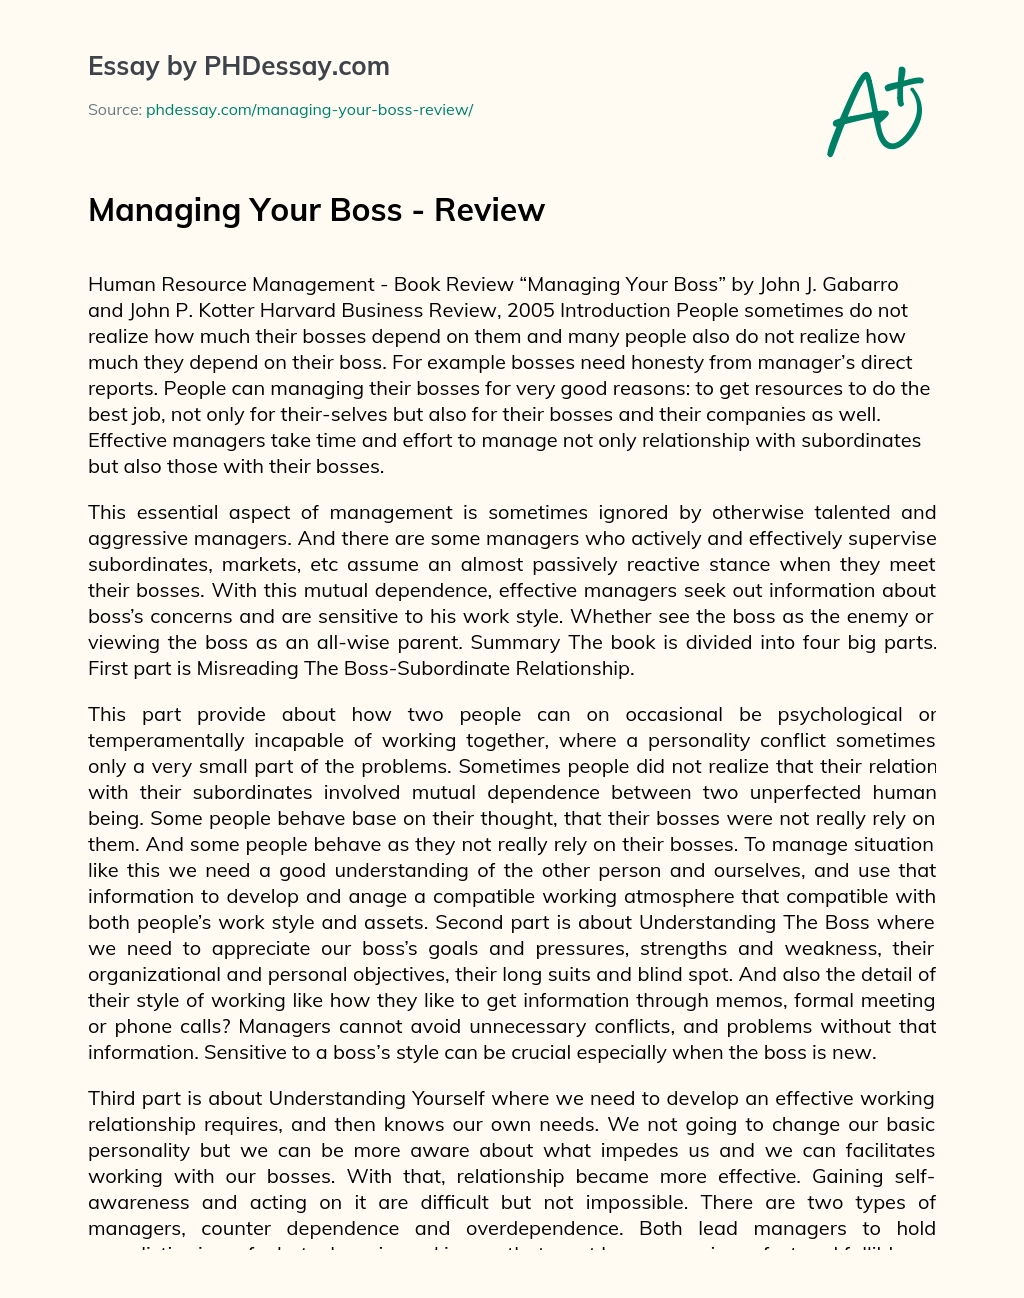 Managing Your Boss – Review essay